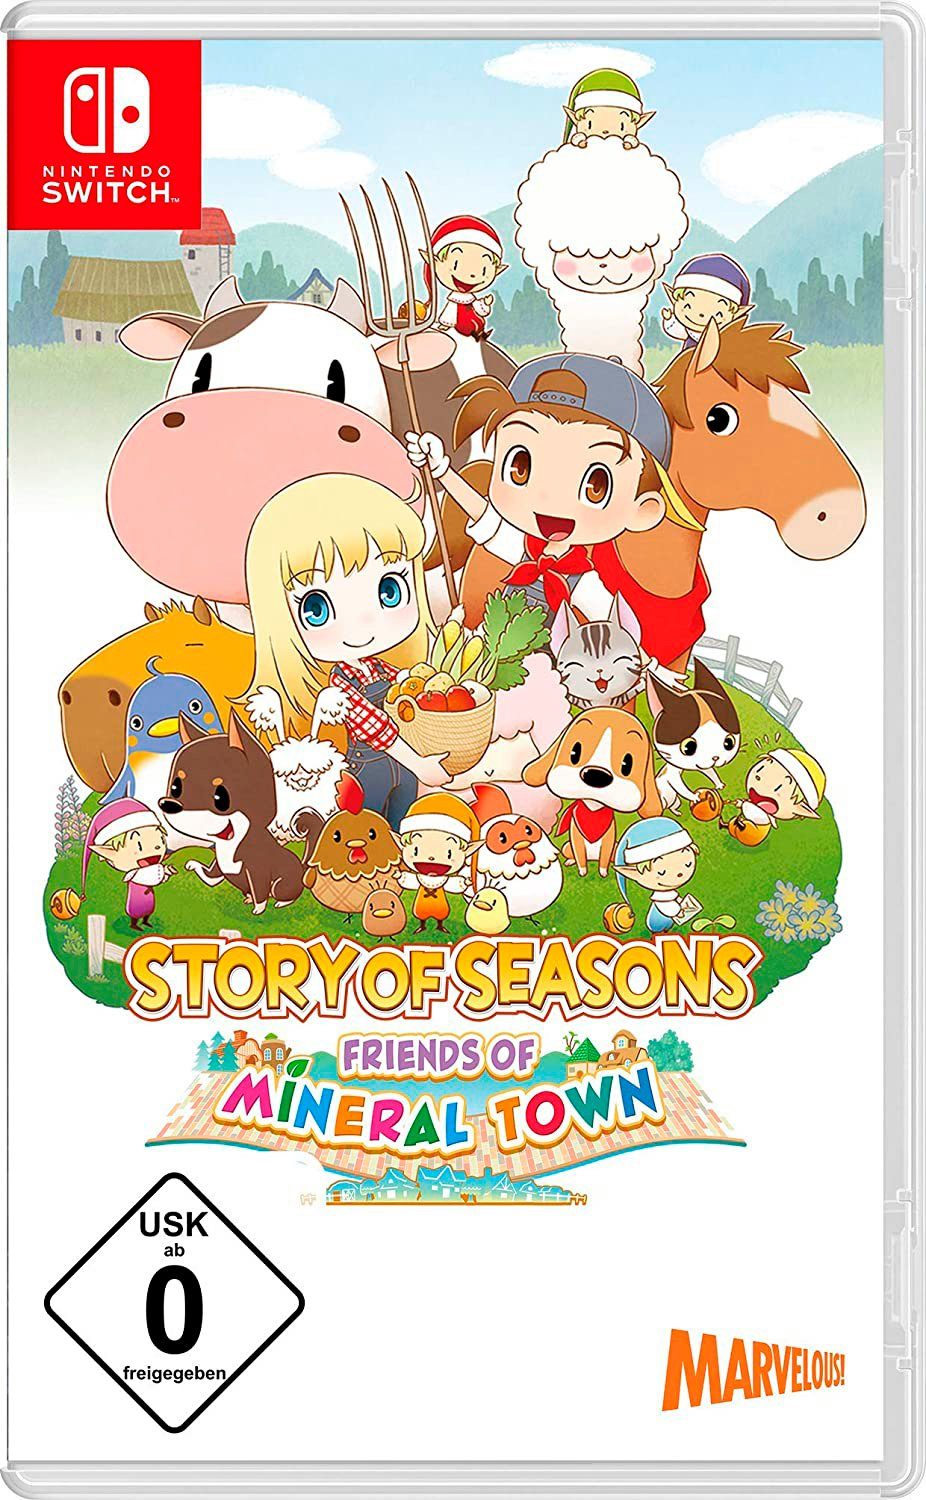 Story Of Nintendo Switch Town Friends Seasons: Mineral Of